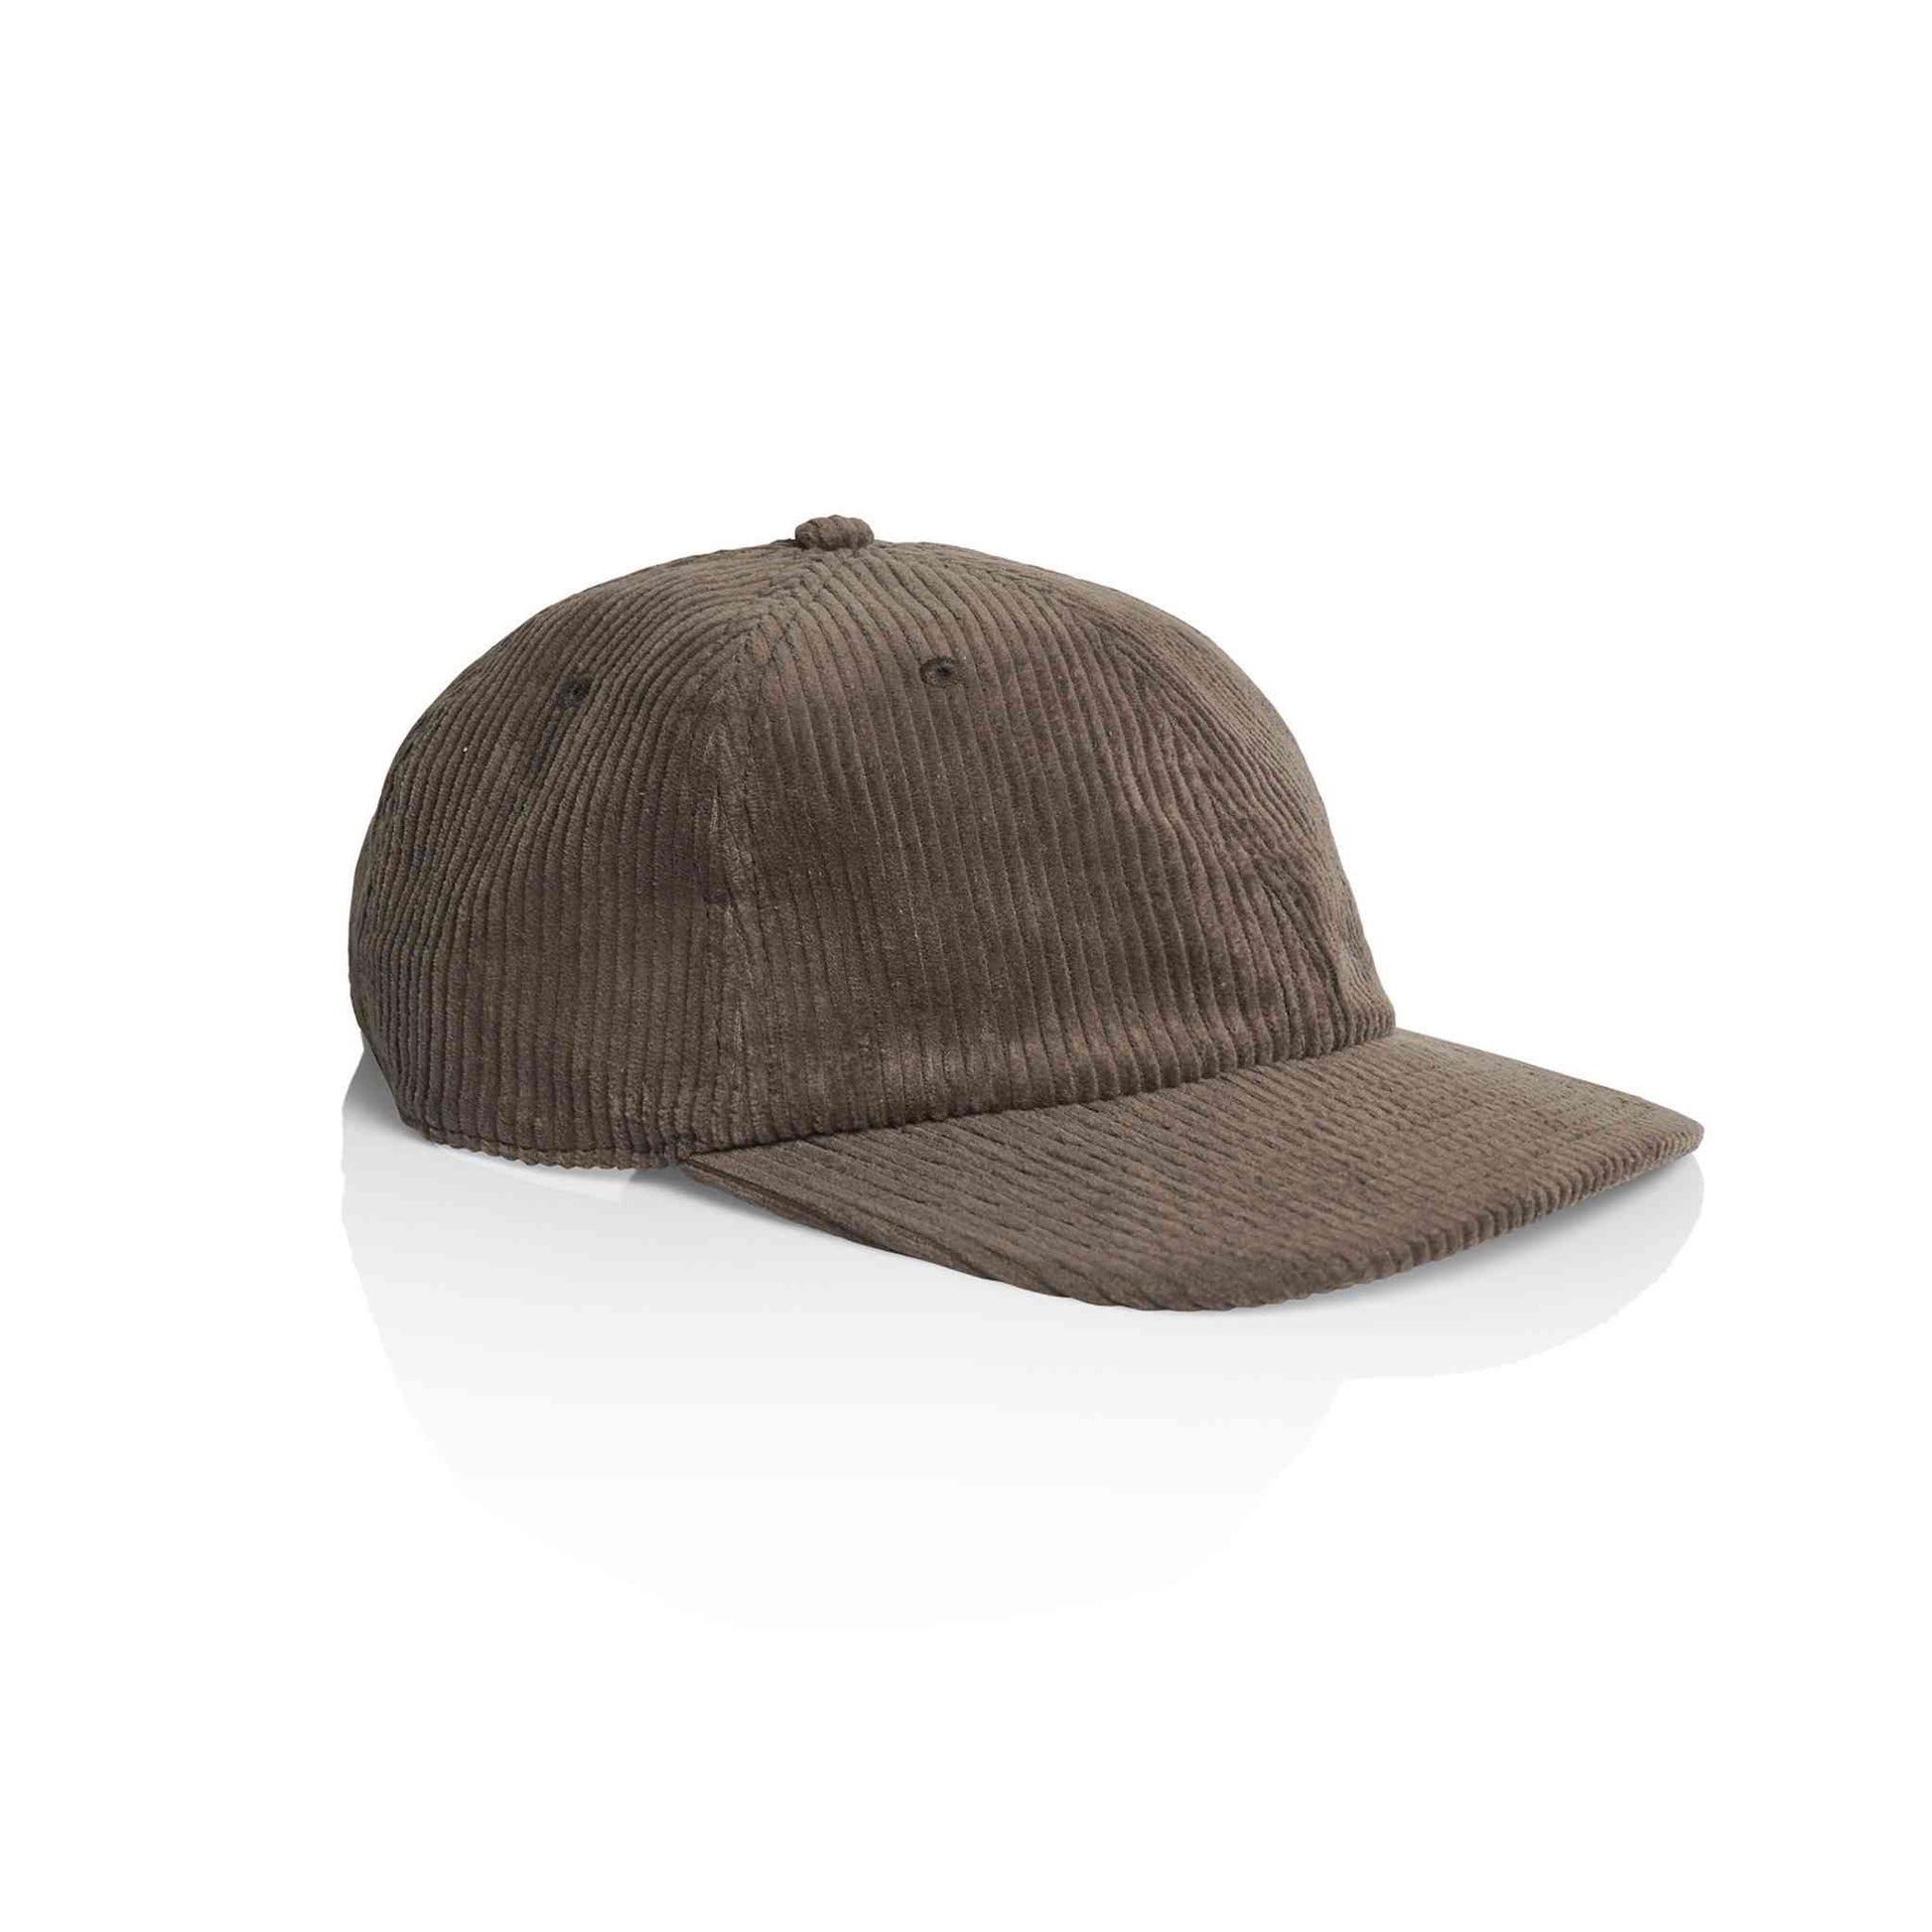 AS Colour 1152 Class 6 panel cord cap in walnut colour, side view